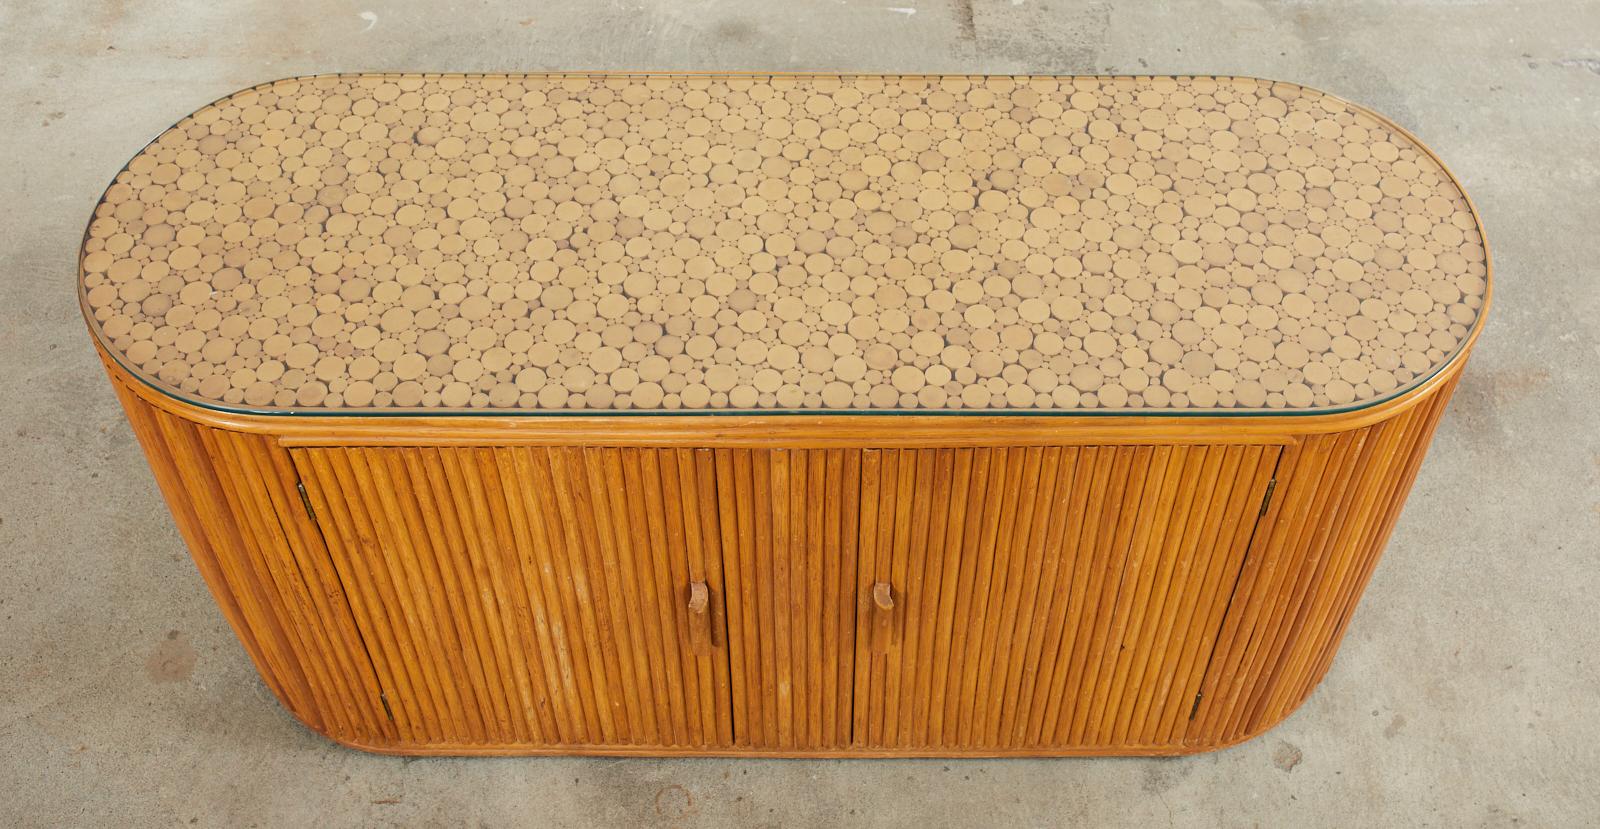 Bamboo Rattan Sideboard Credenza with Demilune Ends In Good Condition For Sale In Rio Vista, CA